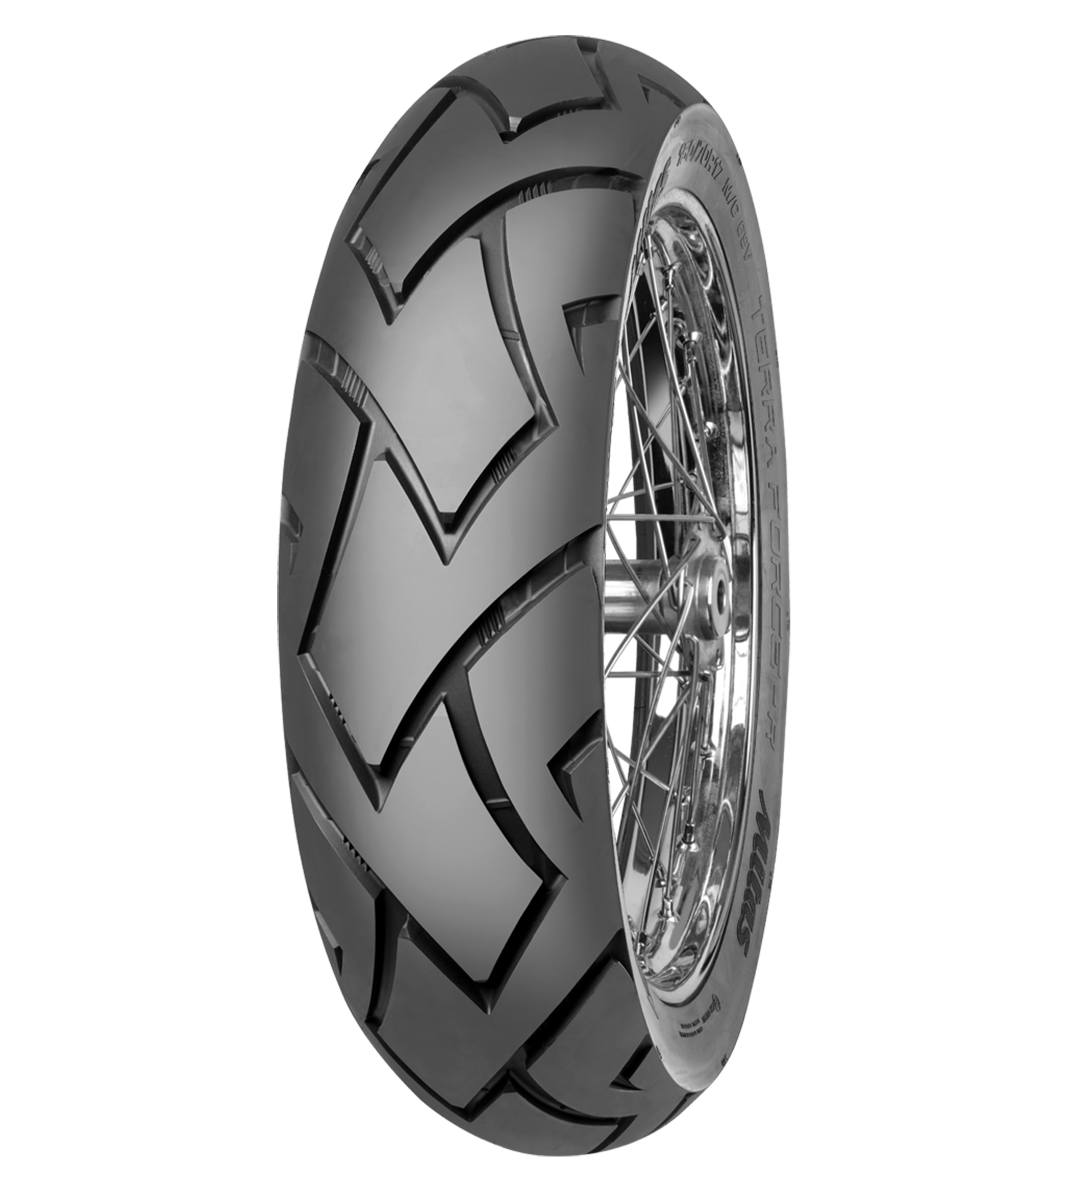 Mitas TERRA FORCE-R 170/60ZR17 Trail ON Trail 72W No Stripe Tubeless Rear Tire, 567778, 170/60ZR17, Adventure Touring, Rear, Terra Force, Terra Force-R, Trail, Trail ON, Tires - Imported and distributed in North &amp; South America by Lindeco Genuine Powersports - Premier Powersports Equipment and Accessories for Motorcycle Enthusiasts, Professional Riders and Dealers.